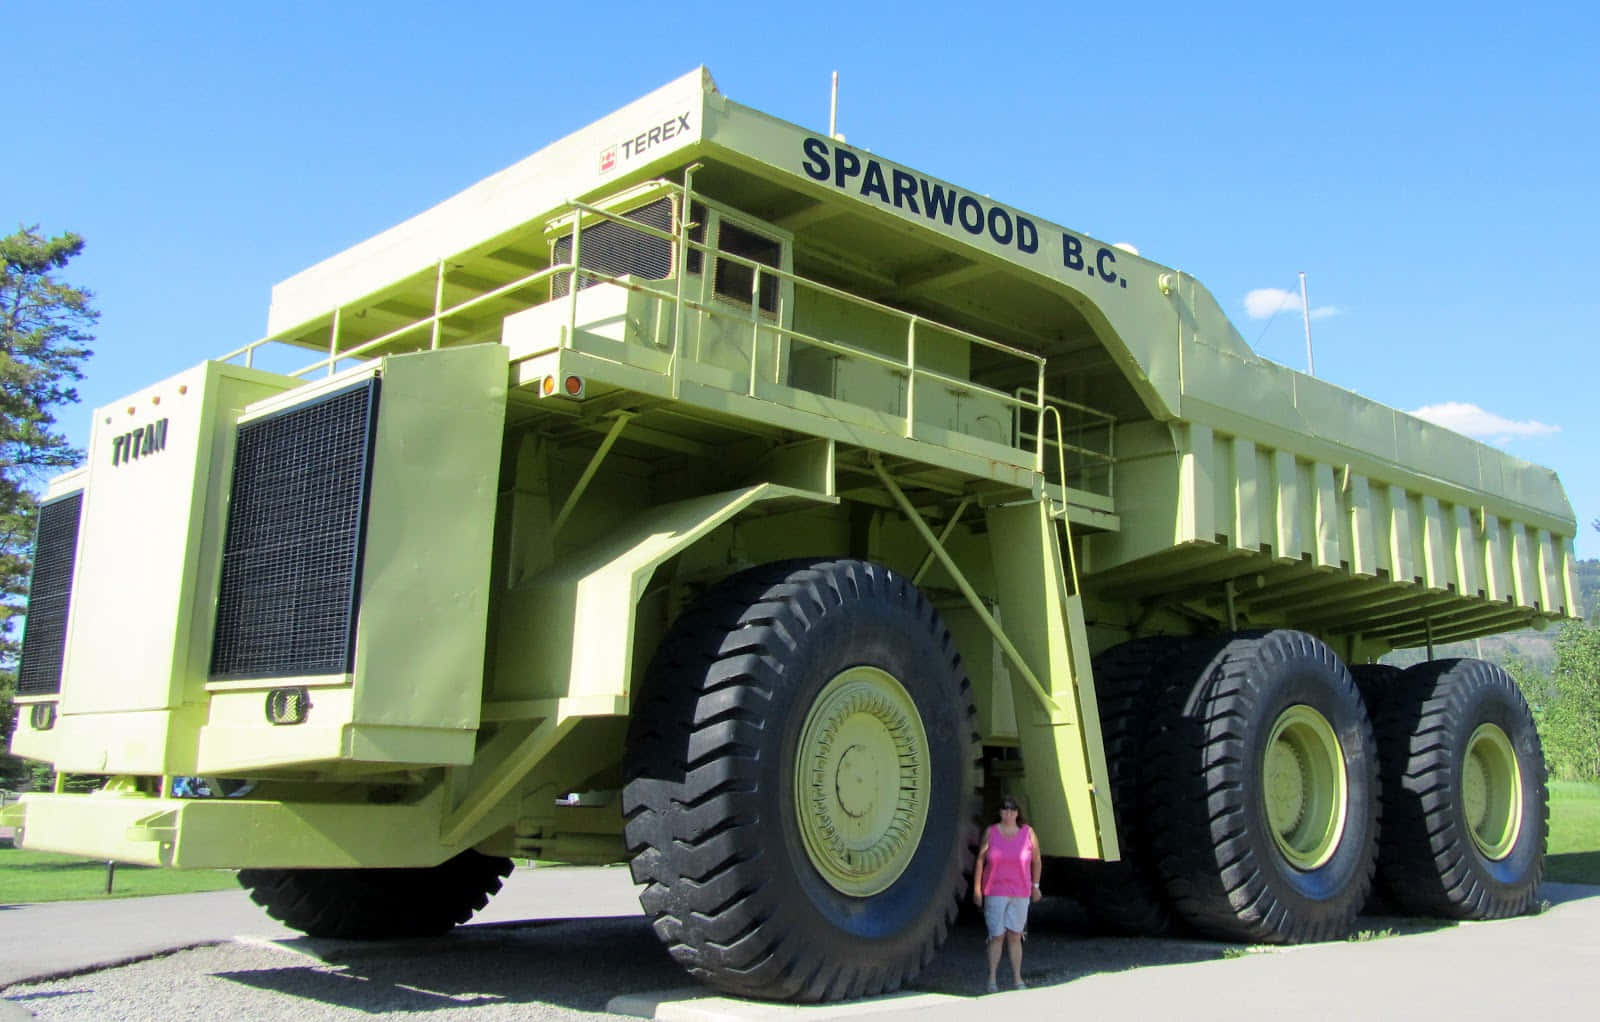 A Large Green Truck